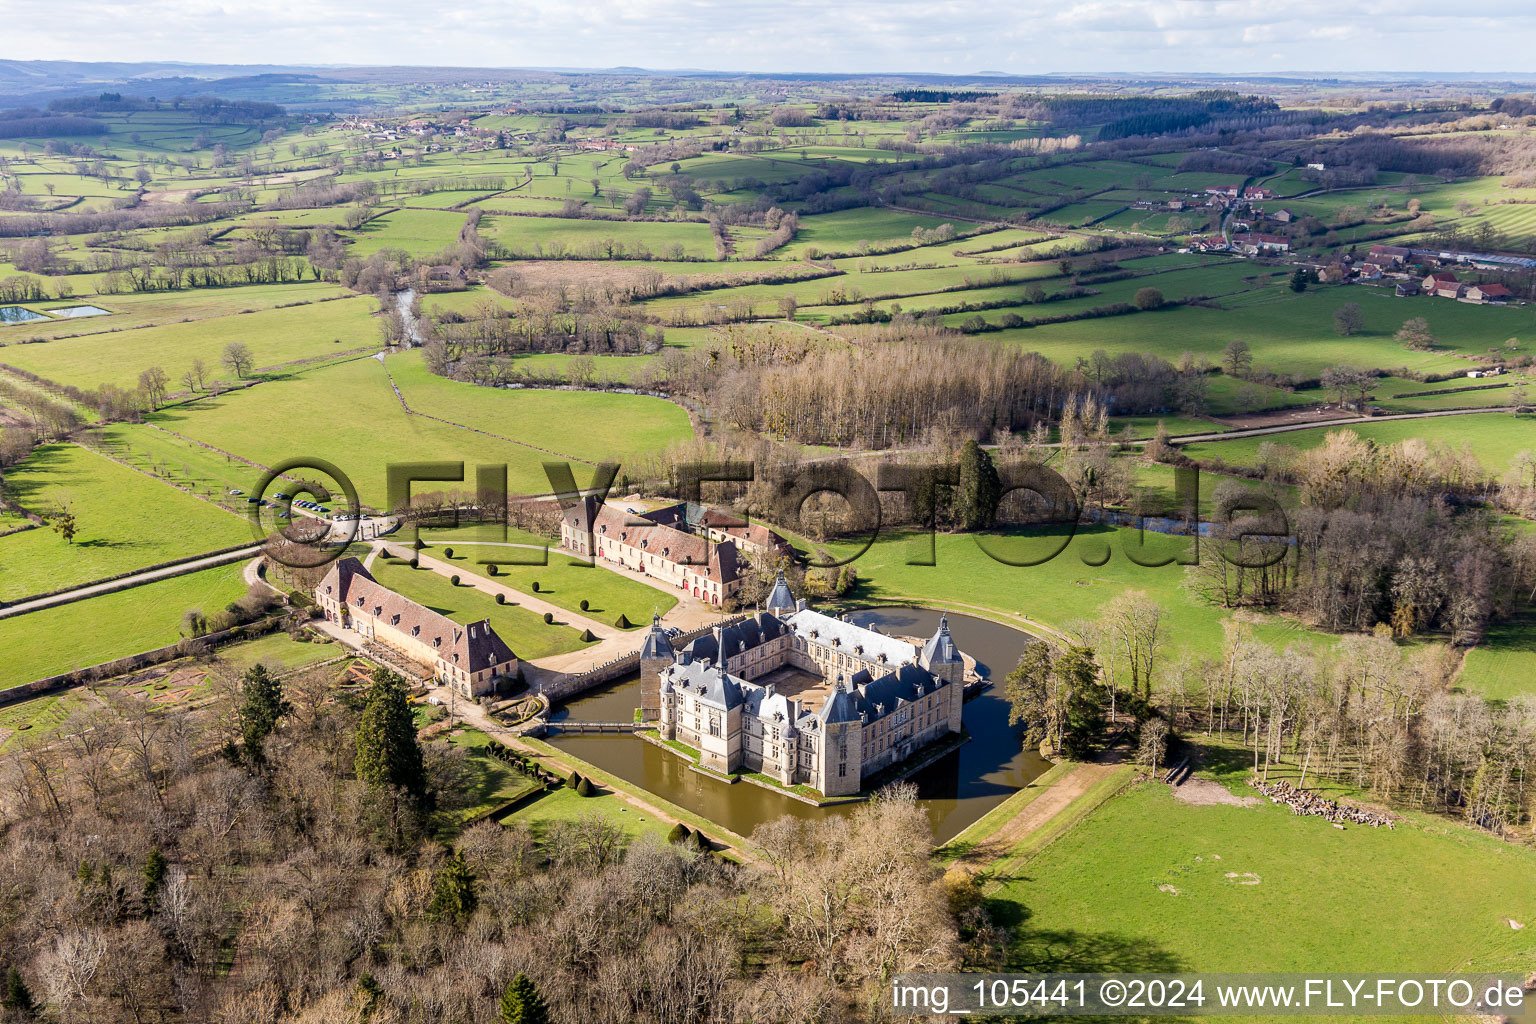 Aerial view of Building and castle park systems of water castle Sully in Sully in Bourgogne-Franche-Comte, France